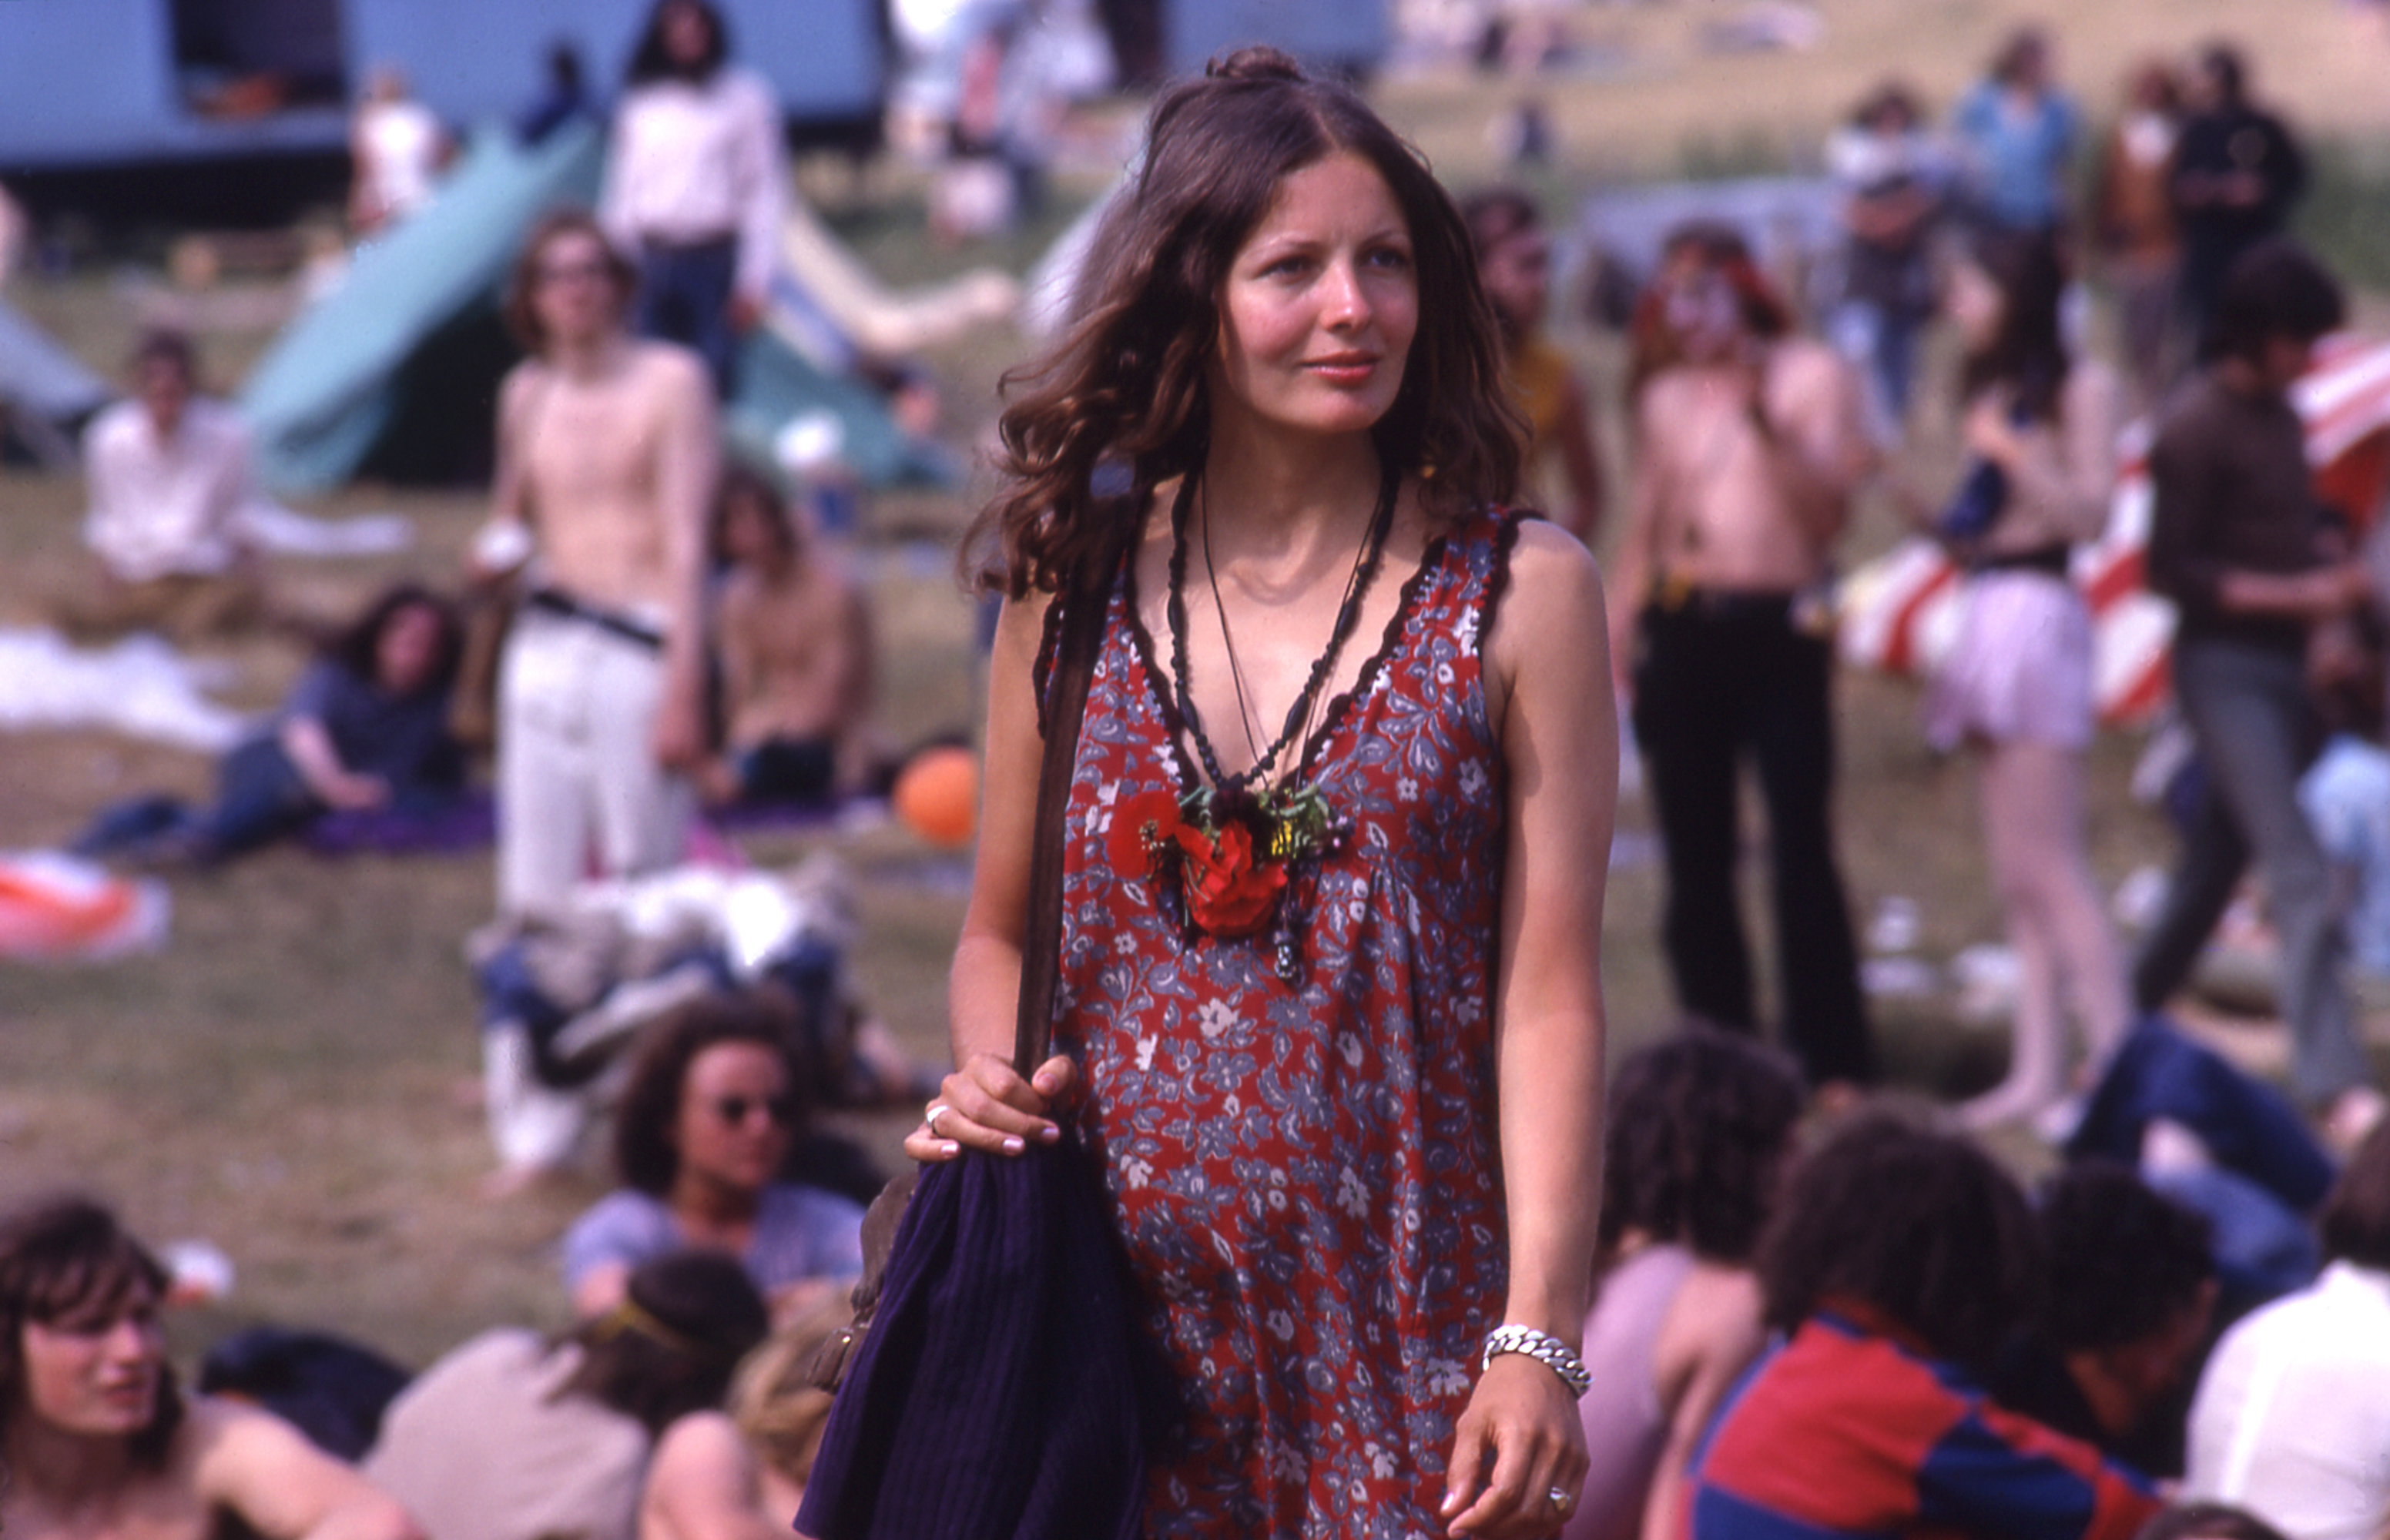 Dee Harkin wearing a red floral dress in the middle of a field at glastonbury 1971